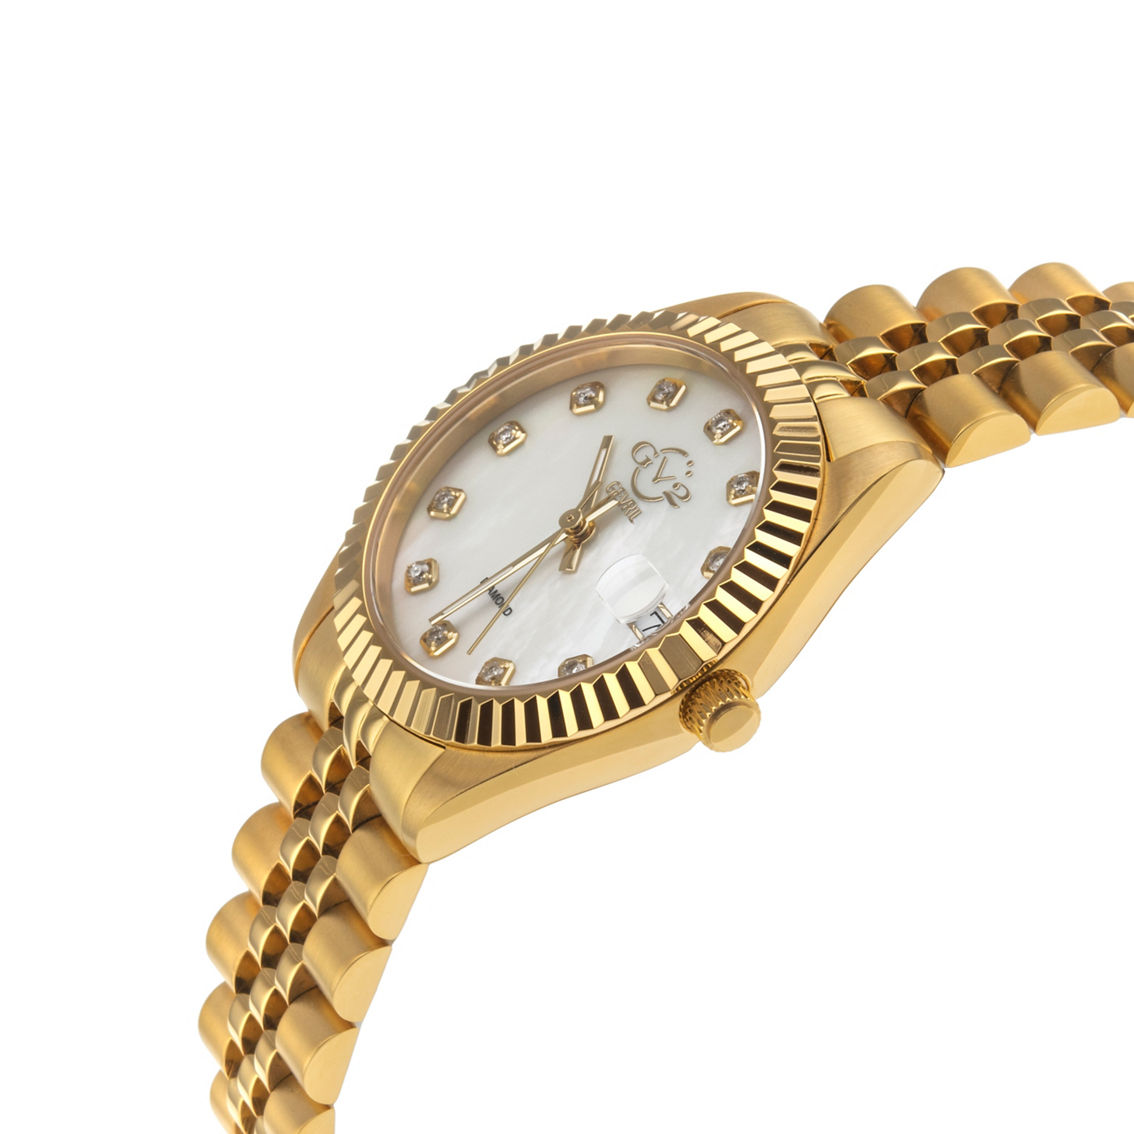 Gevril Women's GV2 Naples Swiss Quartz Mother of Pearl Dial Diamond Accent Watch - Image 3 of 3